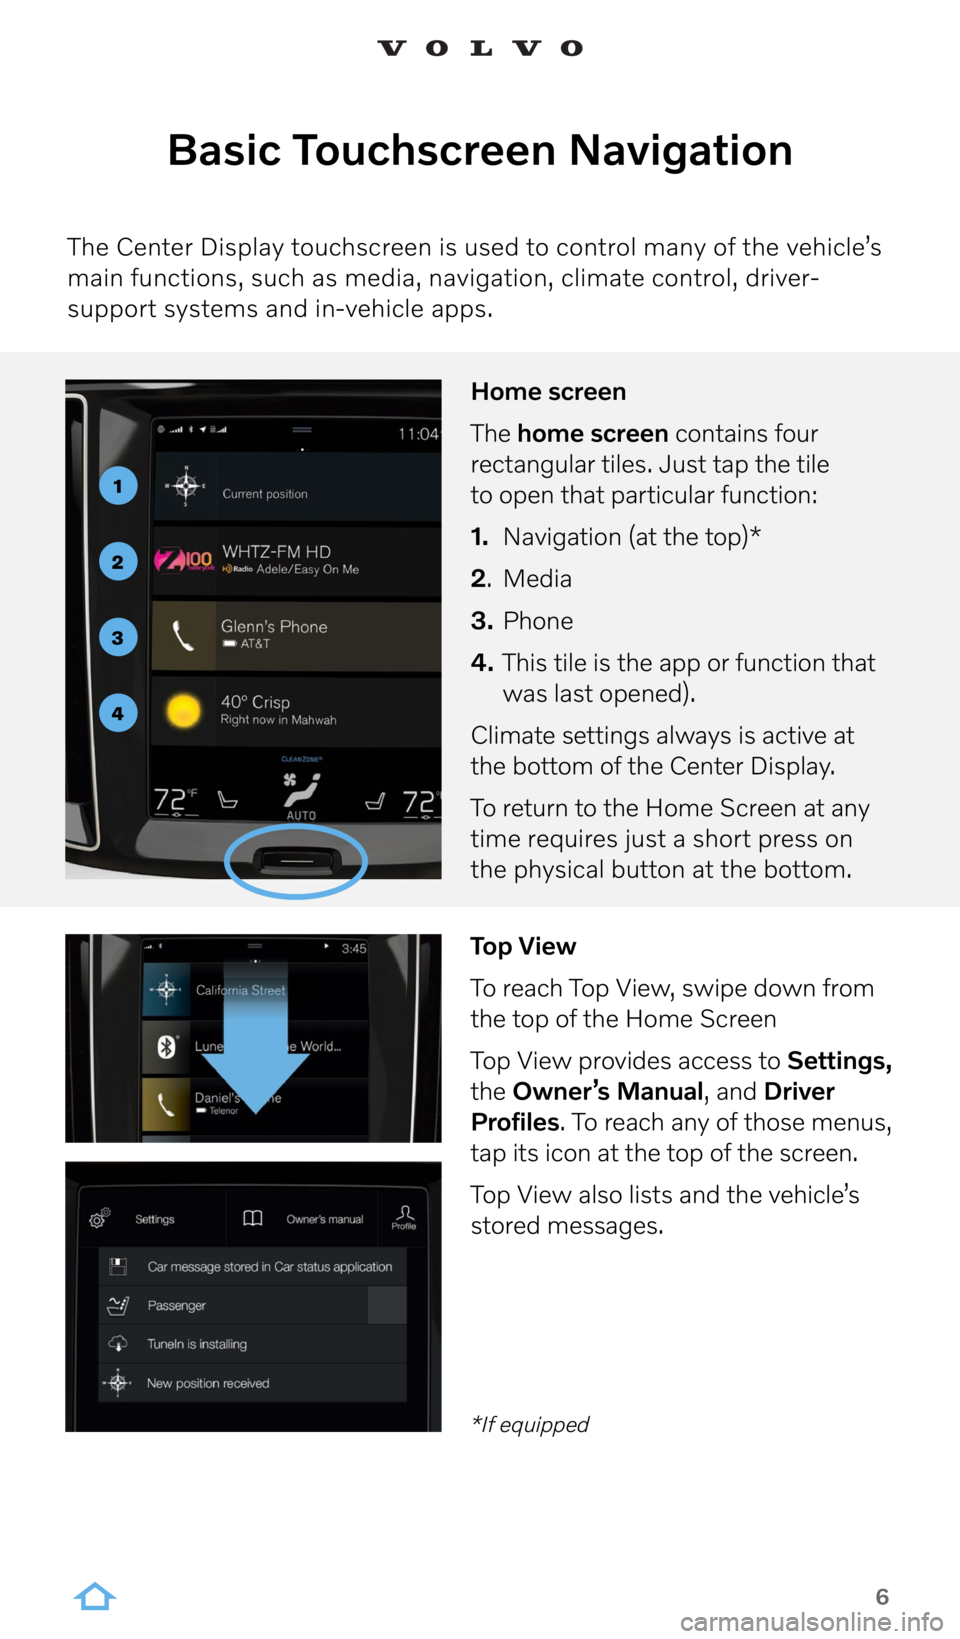 VOLVO XC40 2022  Sensus Digital Guide 6
Basic Touchscreen Navigation
The Center Display touchscreen is used to control many of the vehicle’s 
main functions, such as media, navigation, climate control, driver-
support systems and in-veh